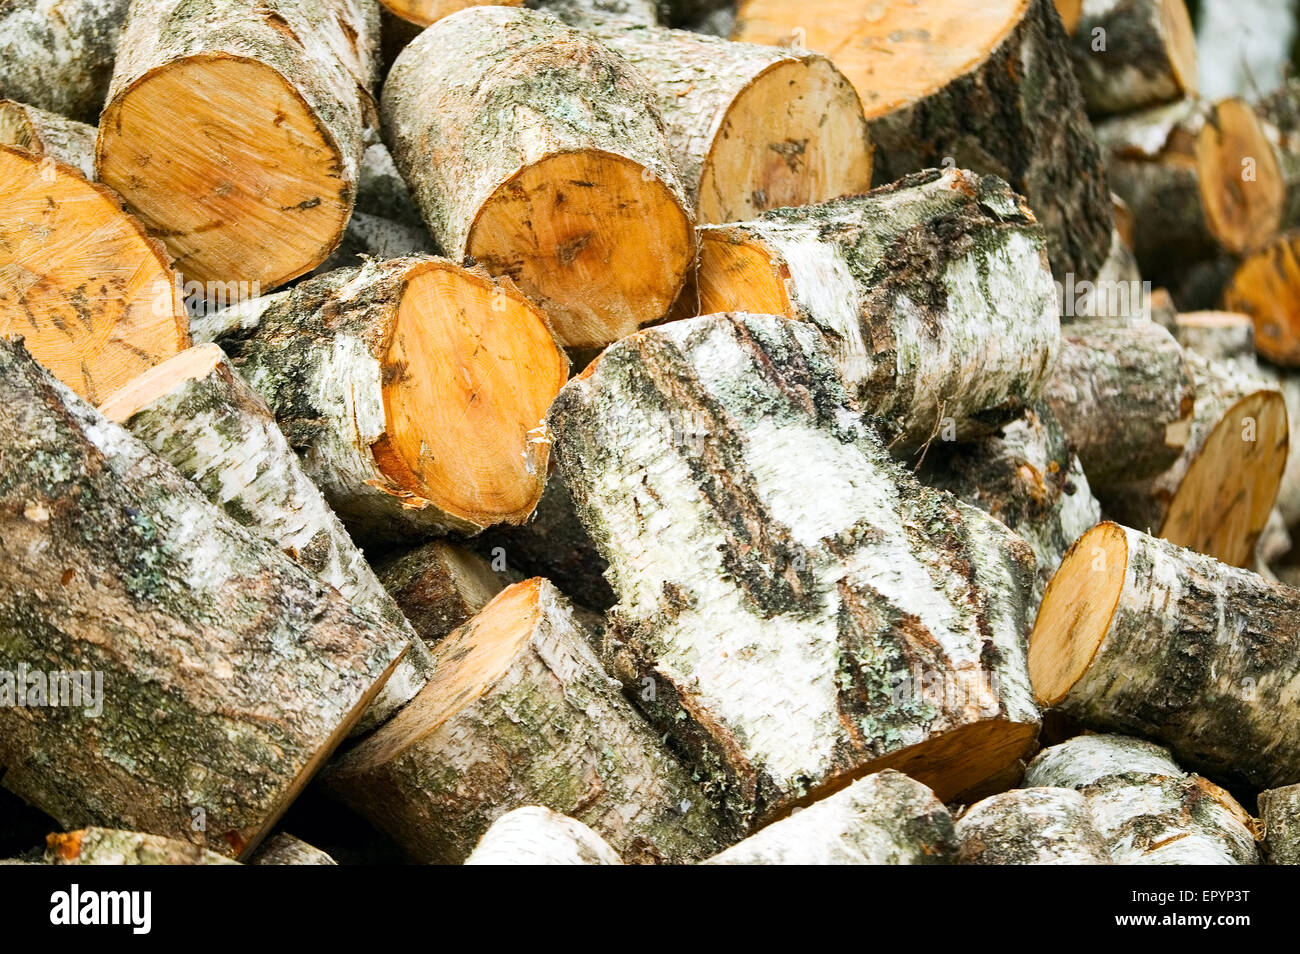 Texture made from wooden cut firewood, background Stock Photo